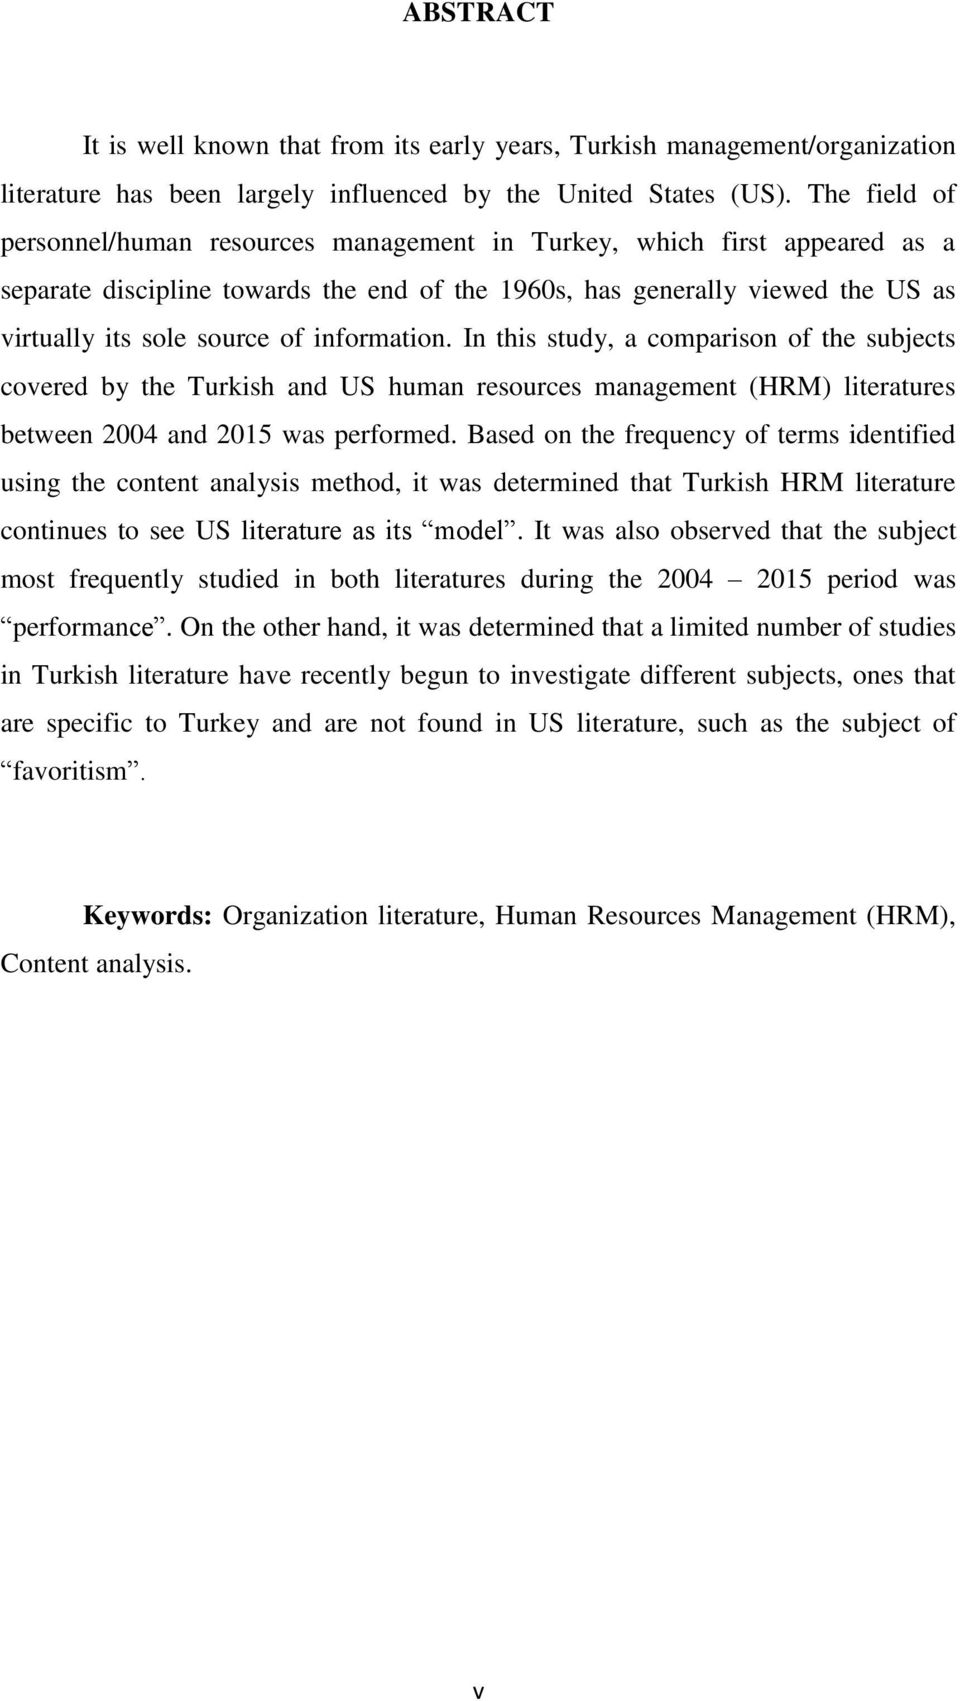 information. In this study, a comparison of the subjects covered by the Turkish and US human resources management (HRM) literatures between 2004 and 2015 was performed.